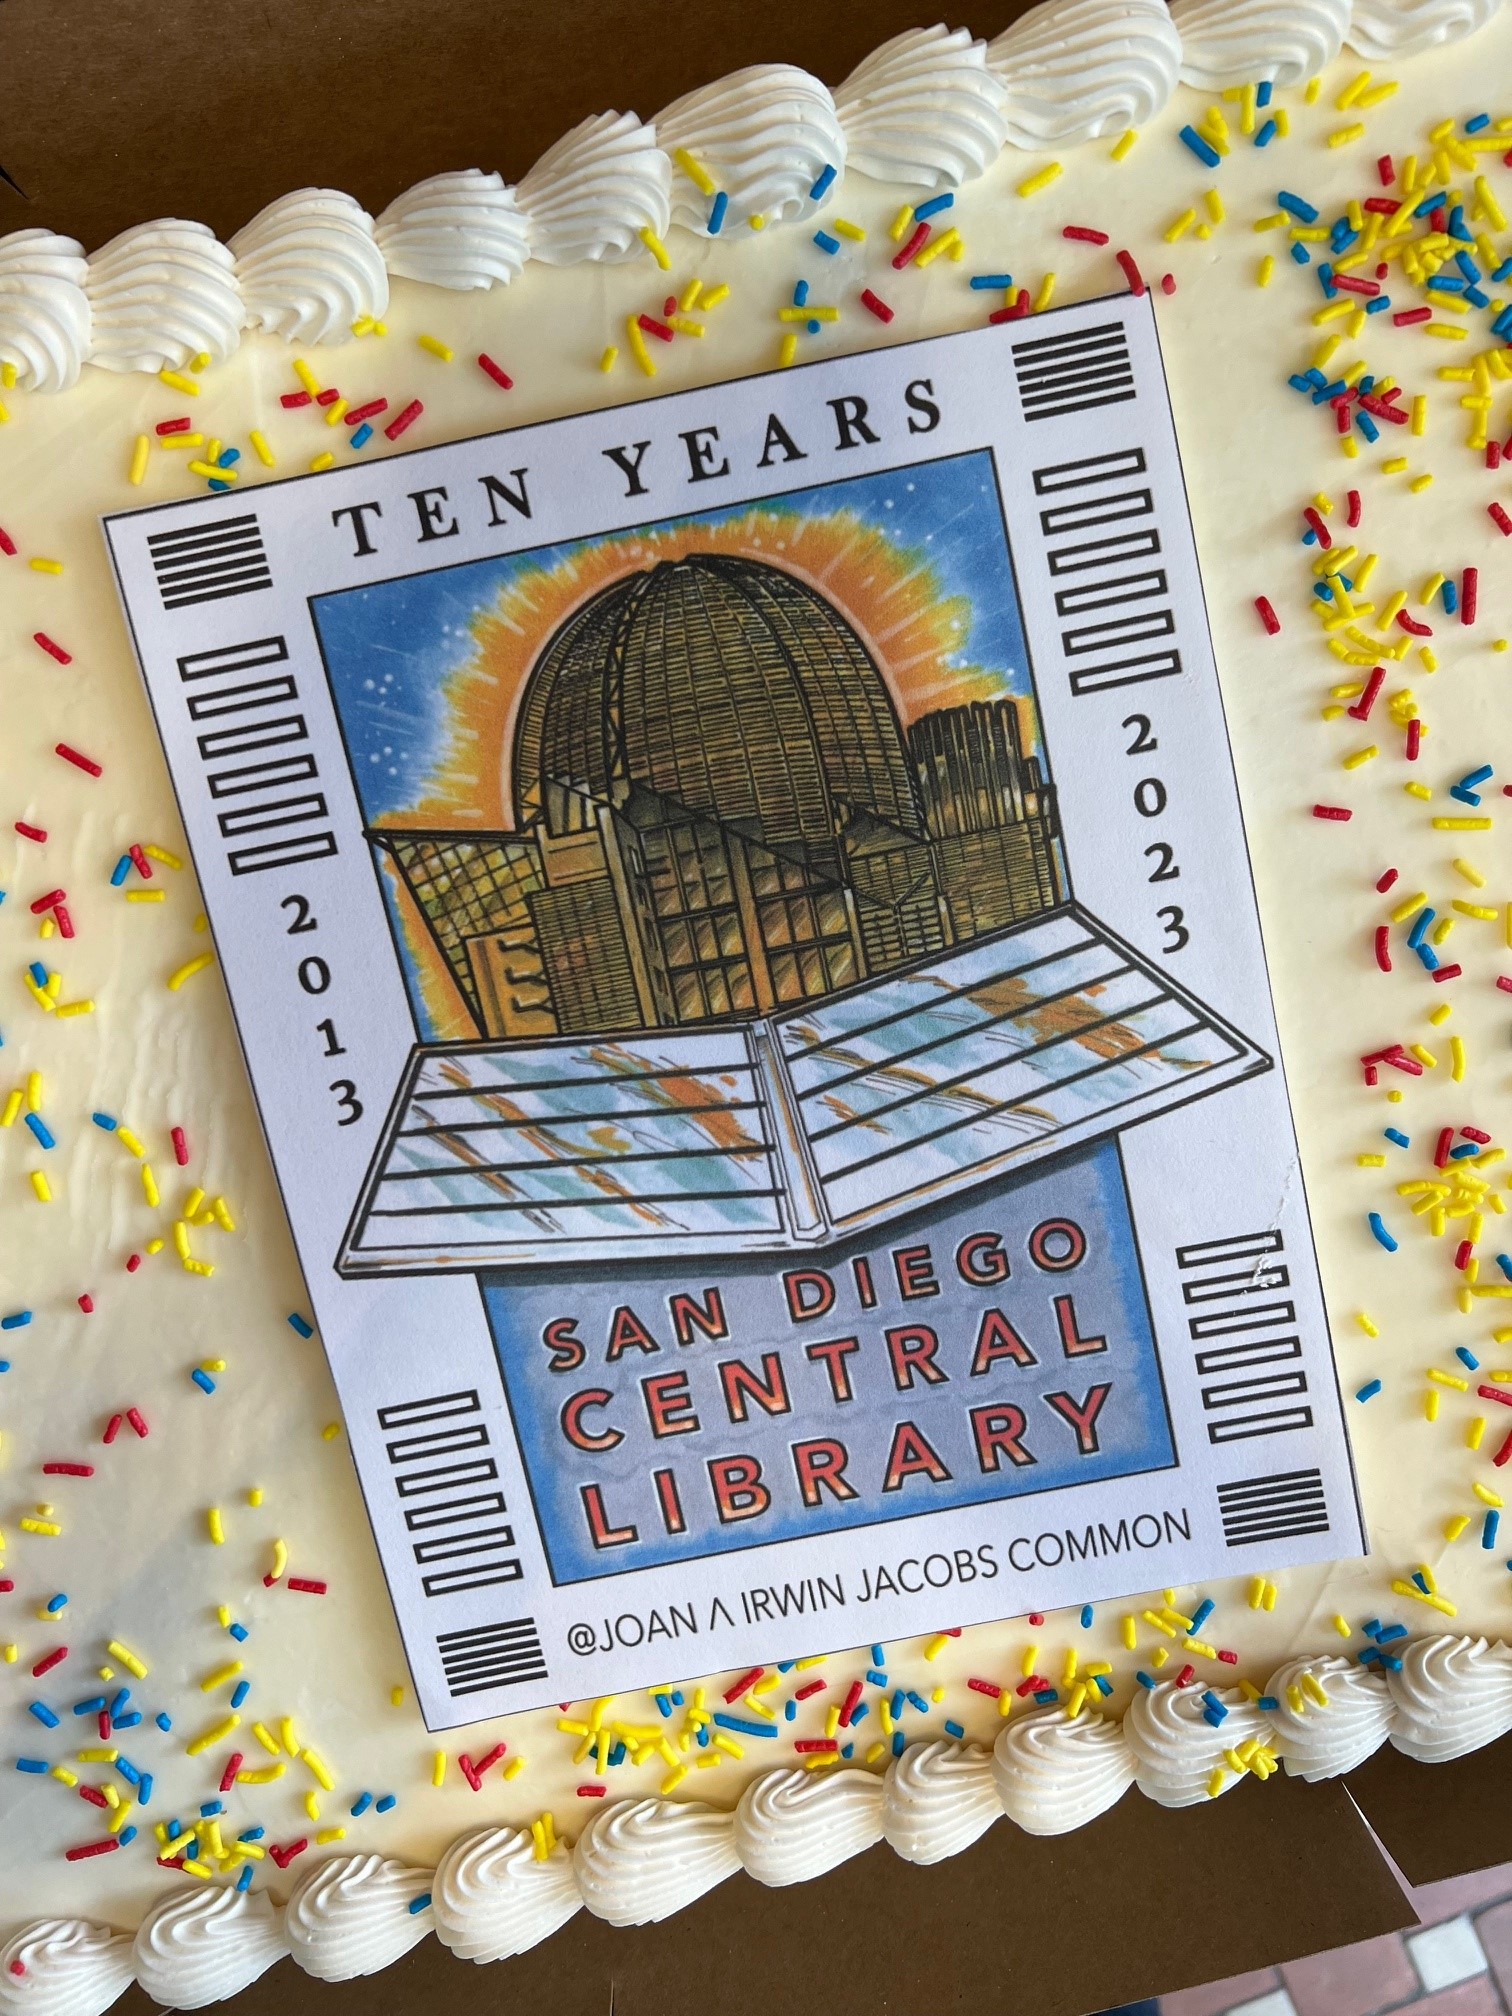 Cake decorated with Central Library 10 year anniversary logo